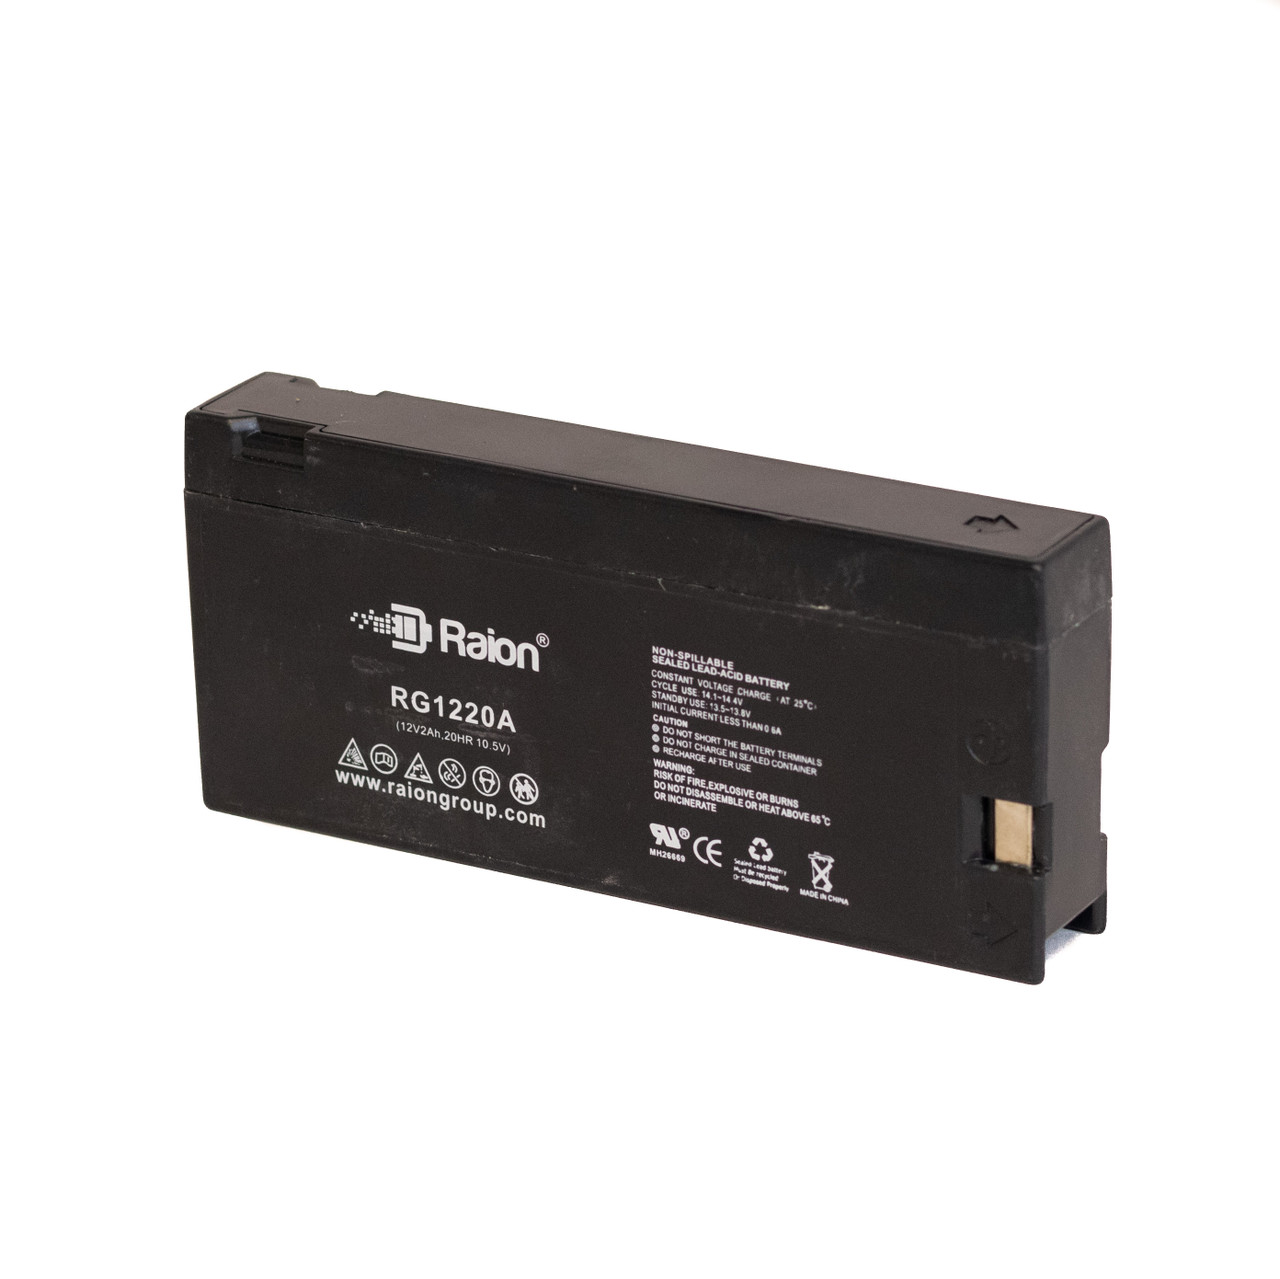 Raion Power RG1220A Replacement Battery for General Electric CG-680